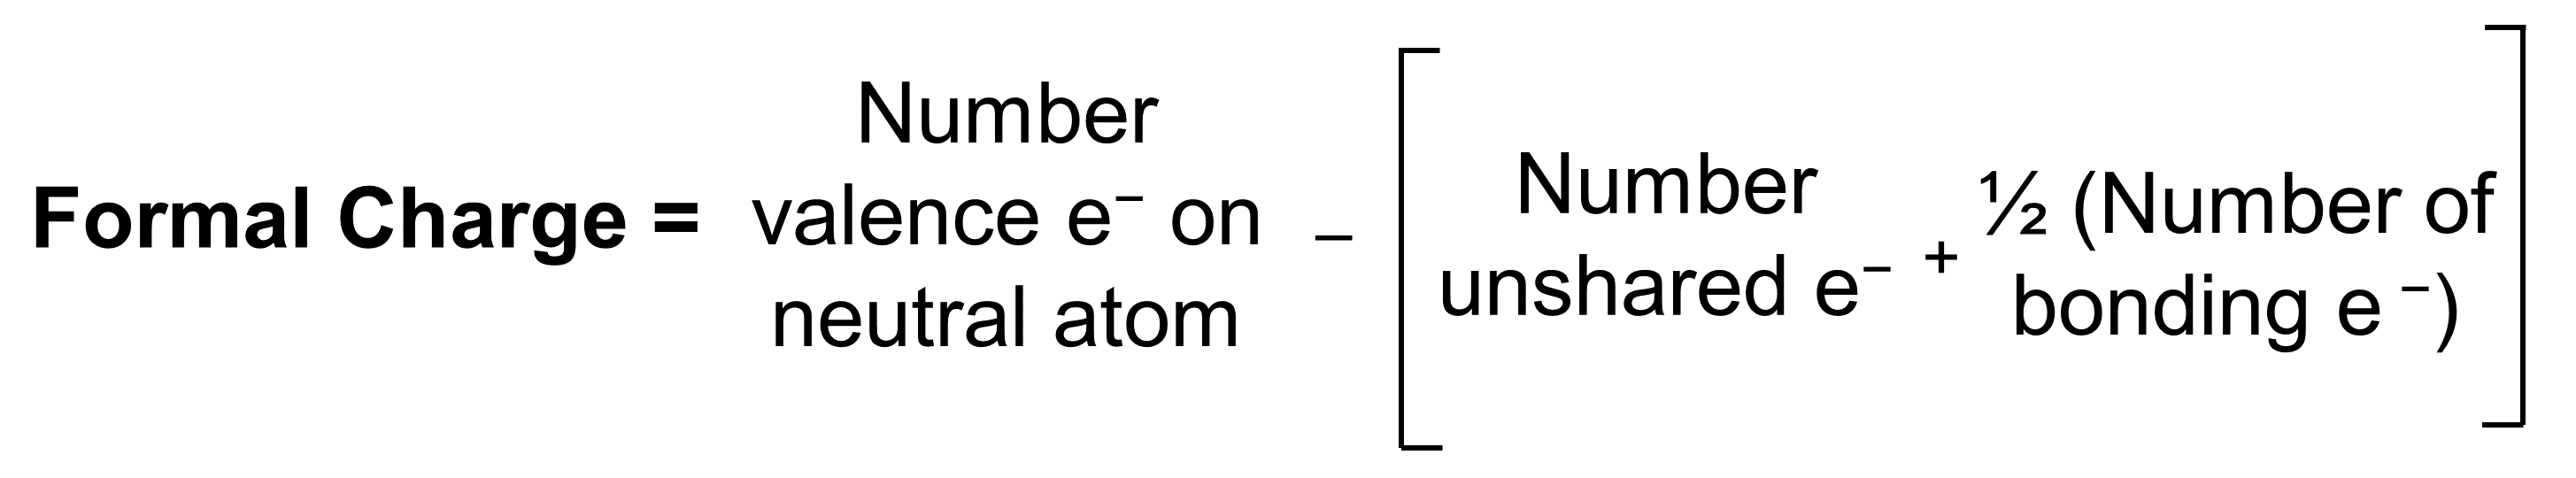 An equation is shown. The formal charge is equal to the number of valence electrons on the neutral atom minus the open parenthesis number of unshared electrons plus one half the number of bonding electrons close parenthesis.